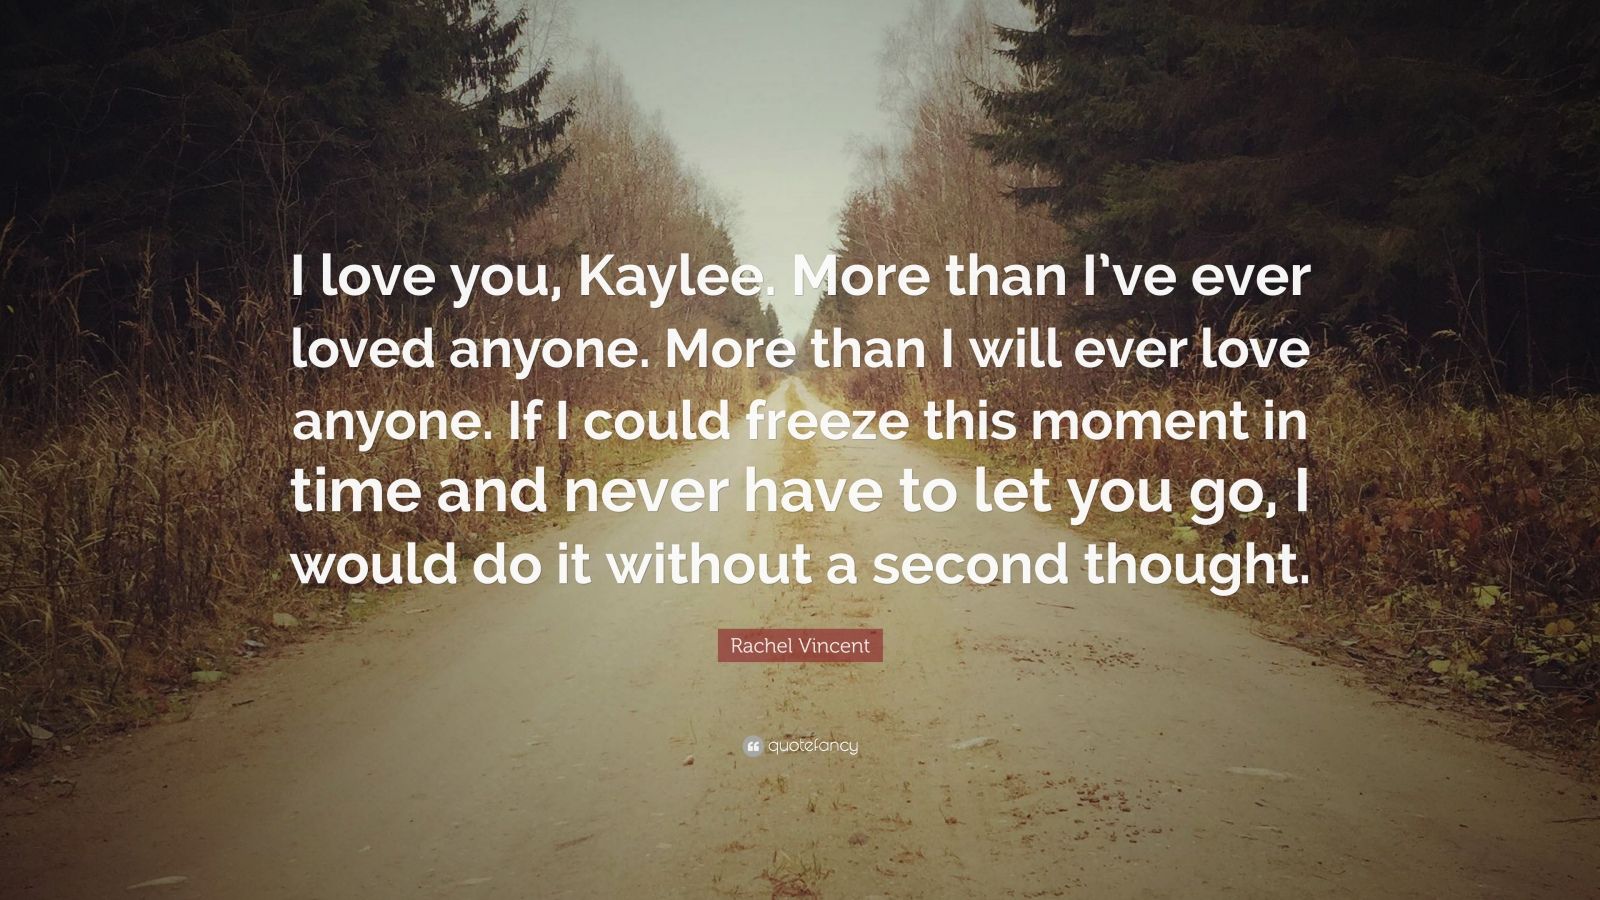 Rachel Vincent Quote: “I love you, Kaylee. More than I’ve ever loved ...